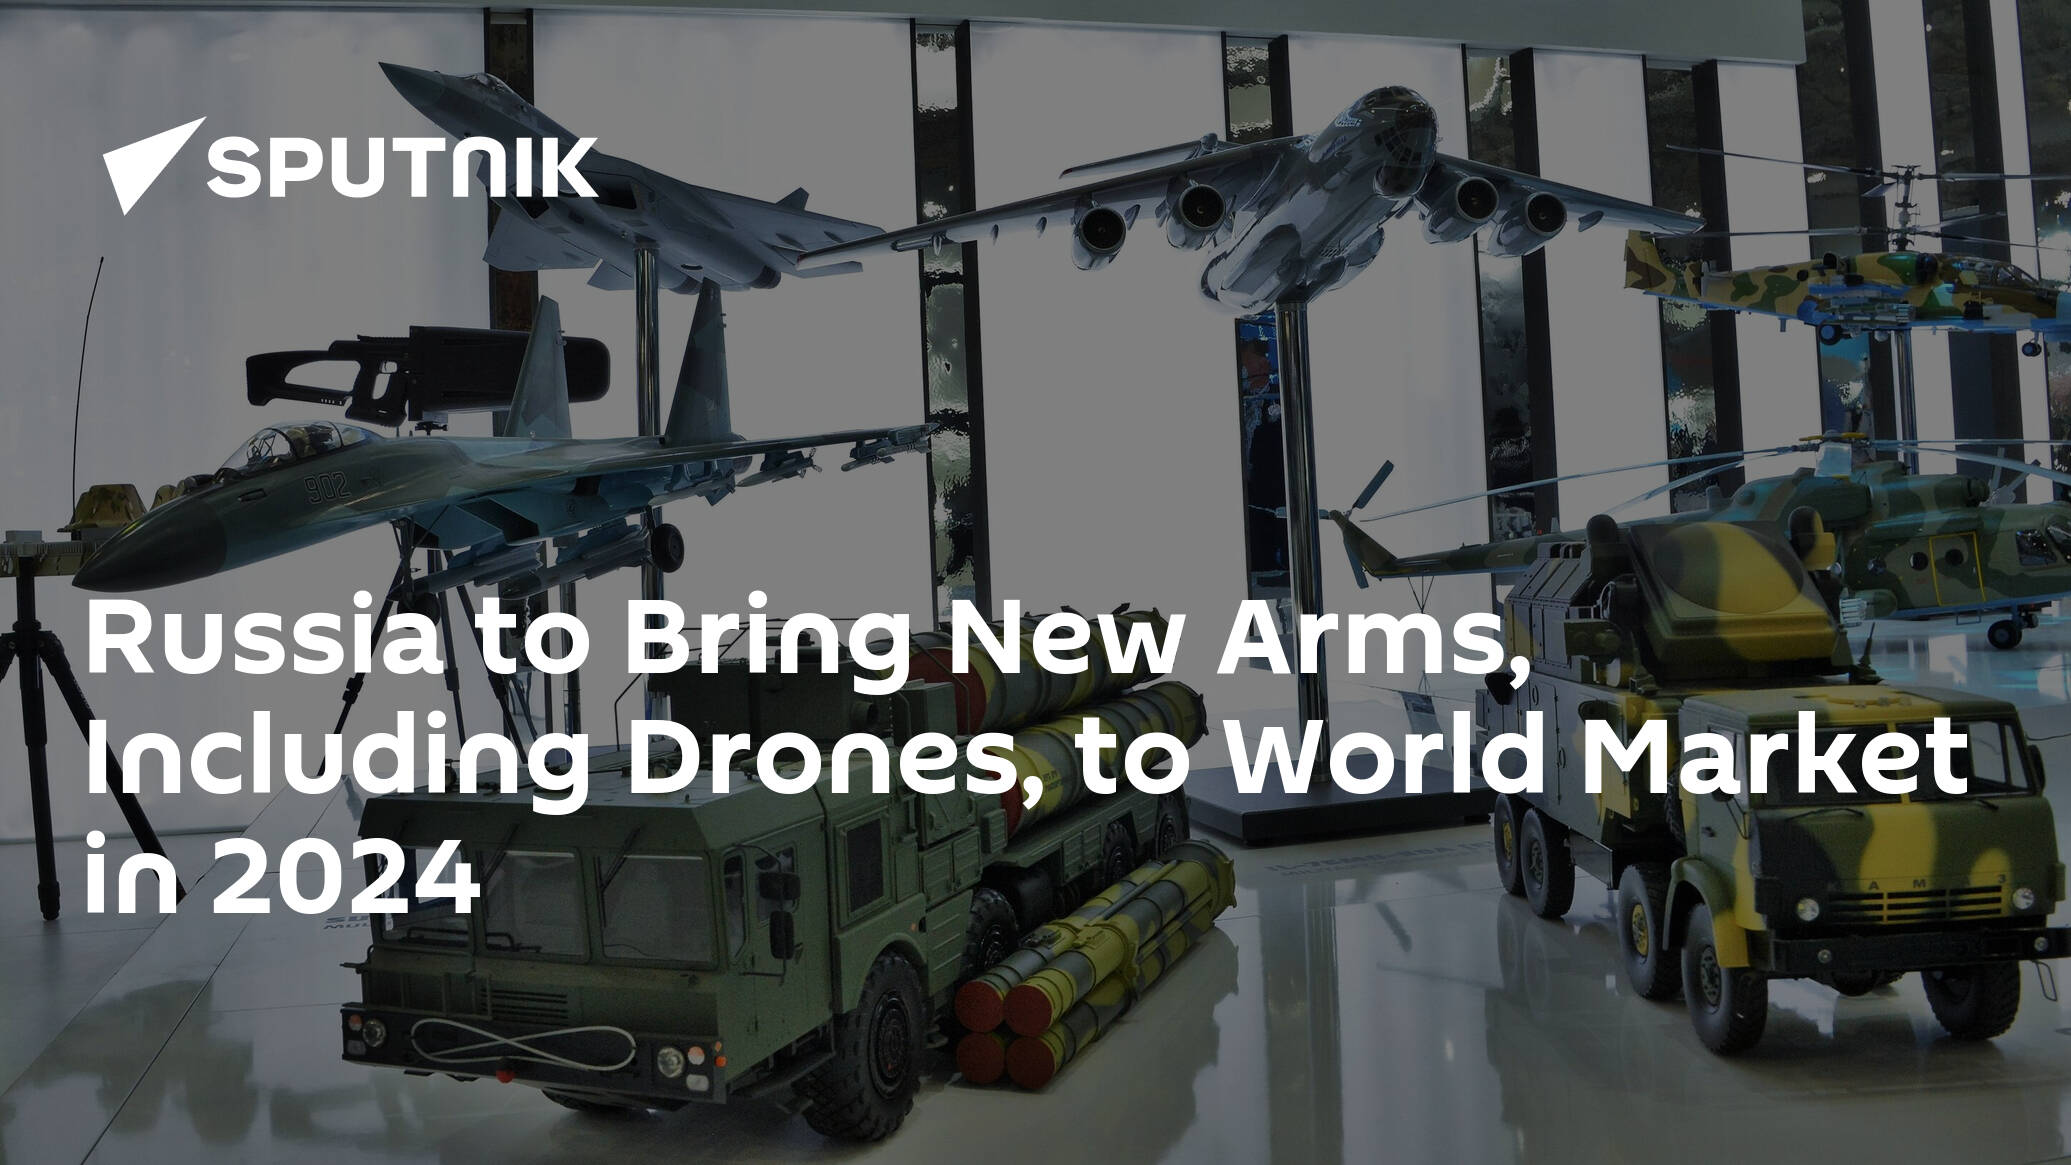 Russia to Bring New Arms, Including Drones, to World Market in 2024